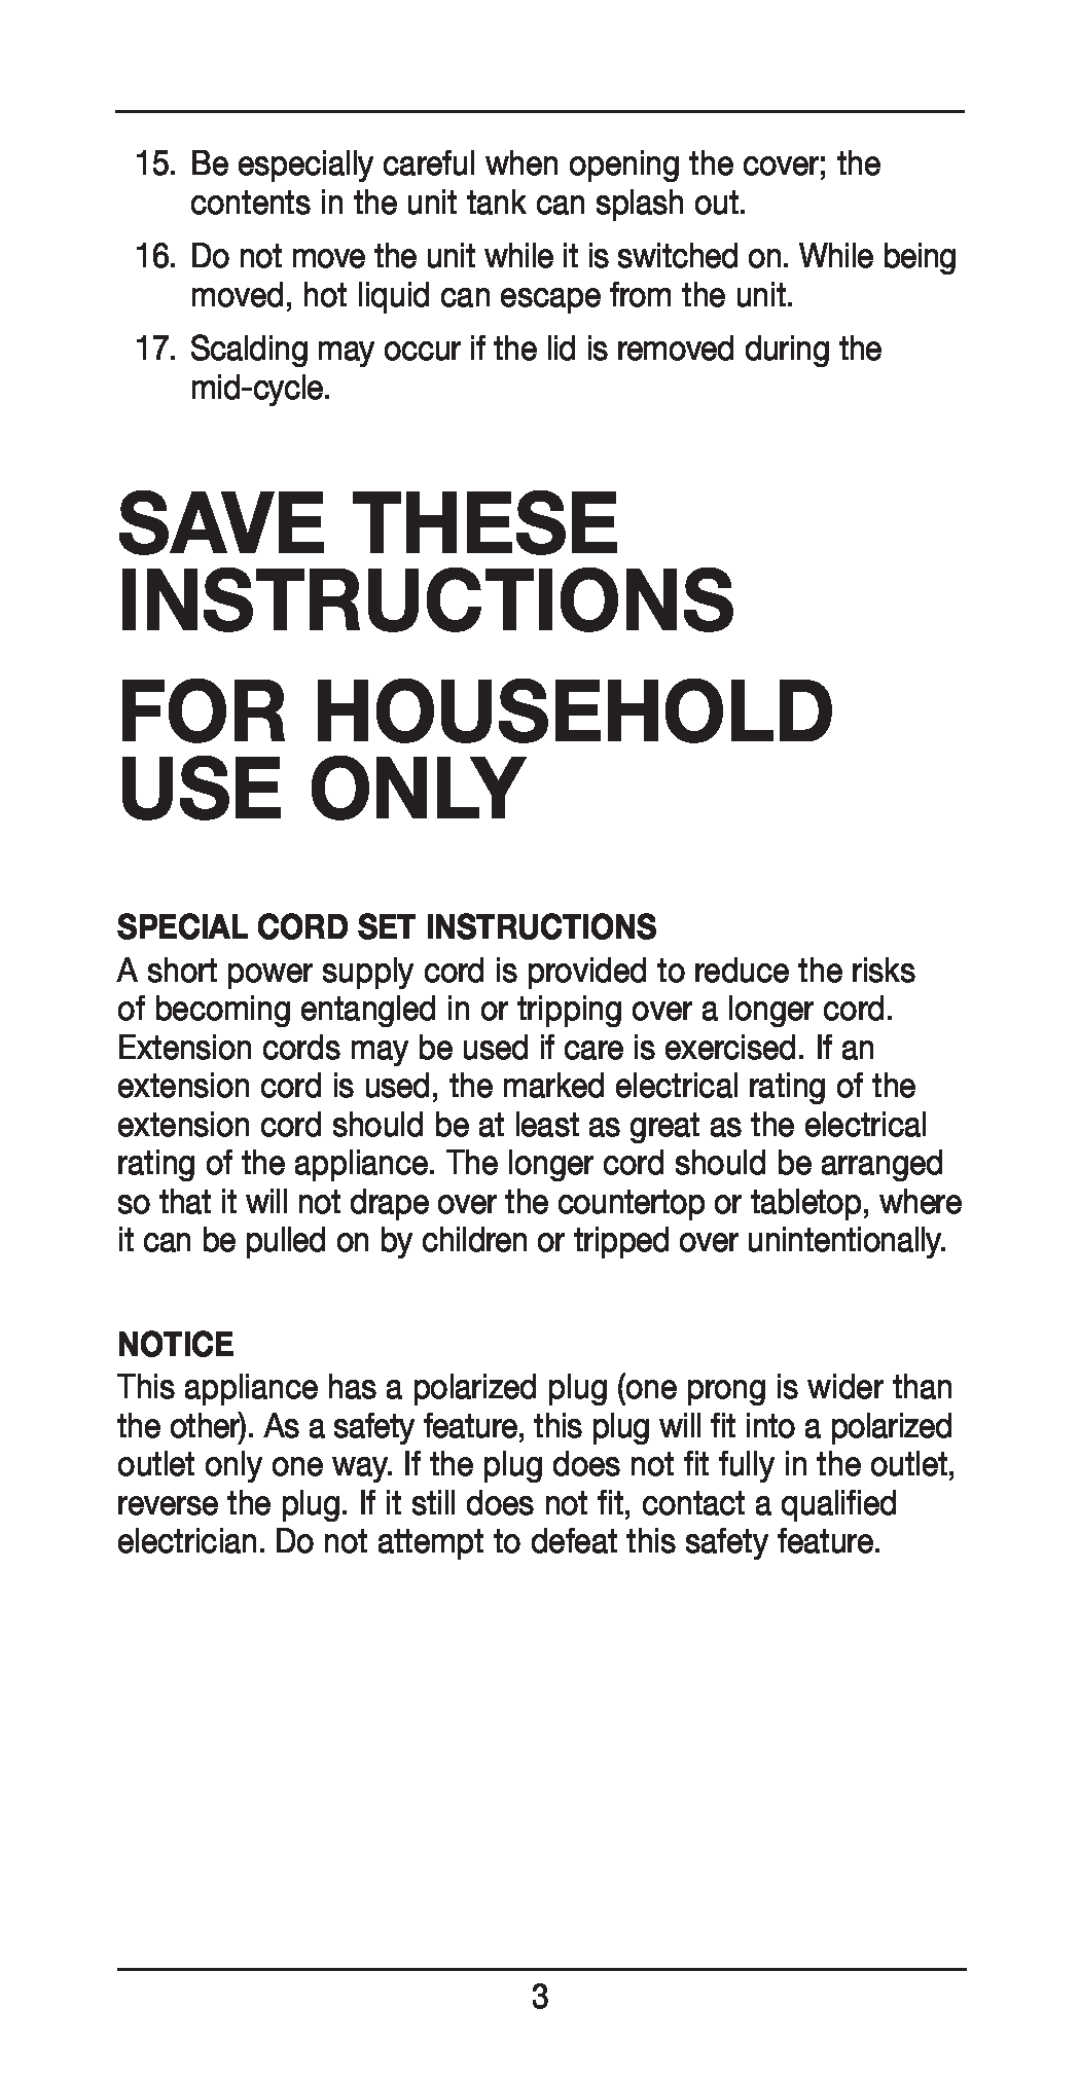 Cuisinart FR-10, Tazzaccino Milk Frother Special Cord Set Instructions, For Household Use Only, Save These Instructions 